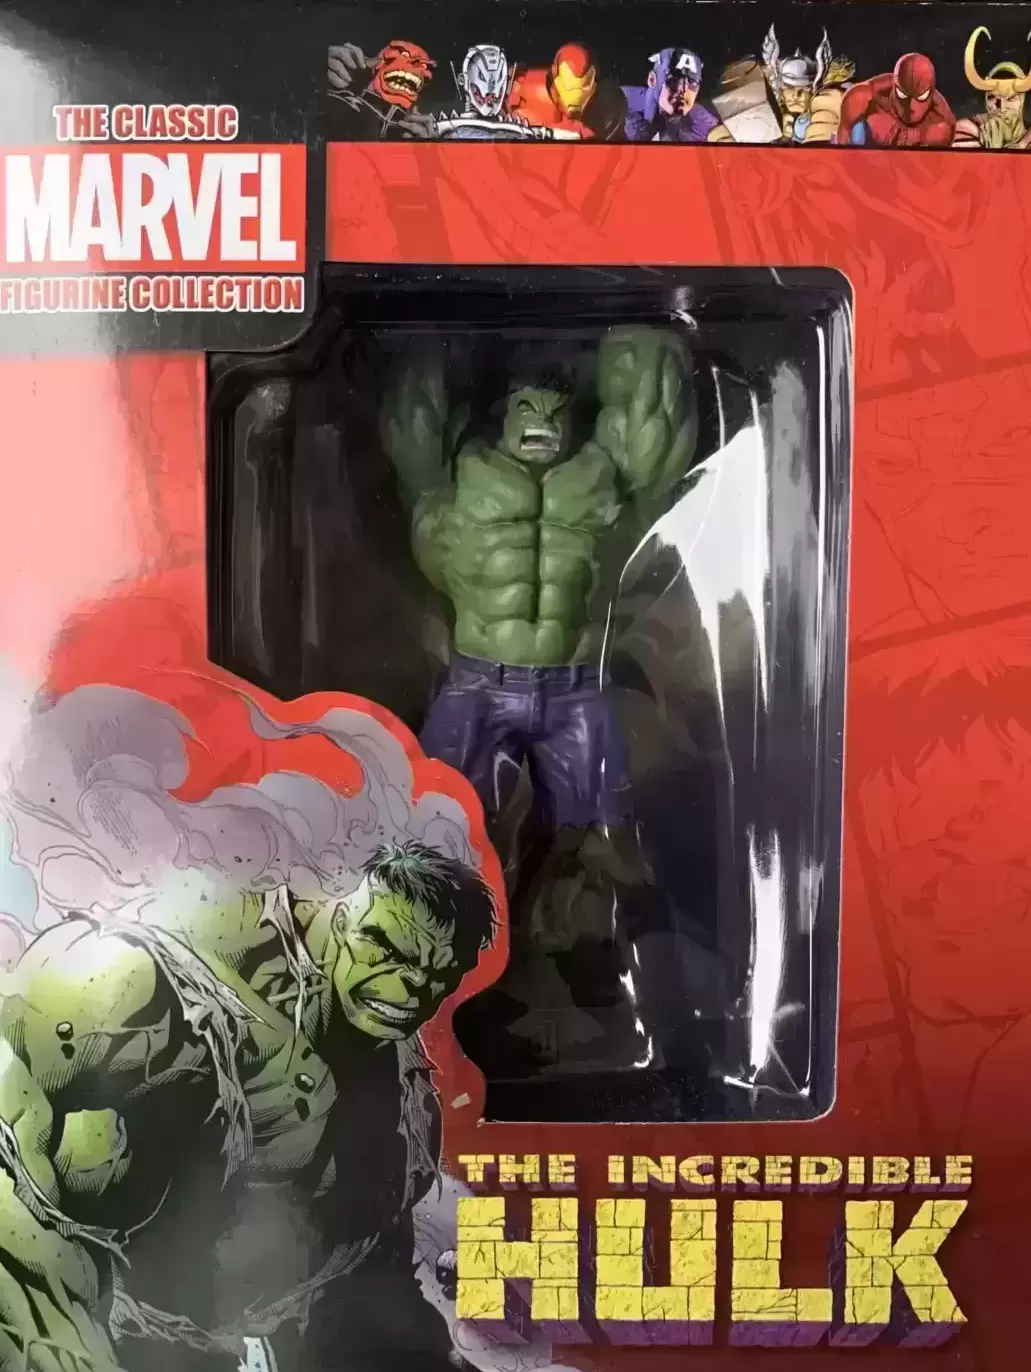 The Classic Marvel Figurine Collection - Résine 1/21 - The Incredible Hulk Green